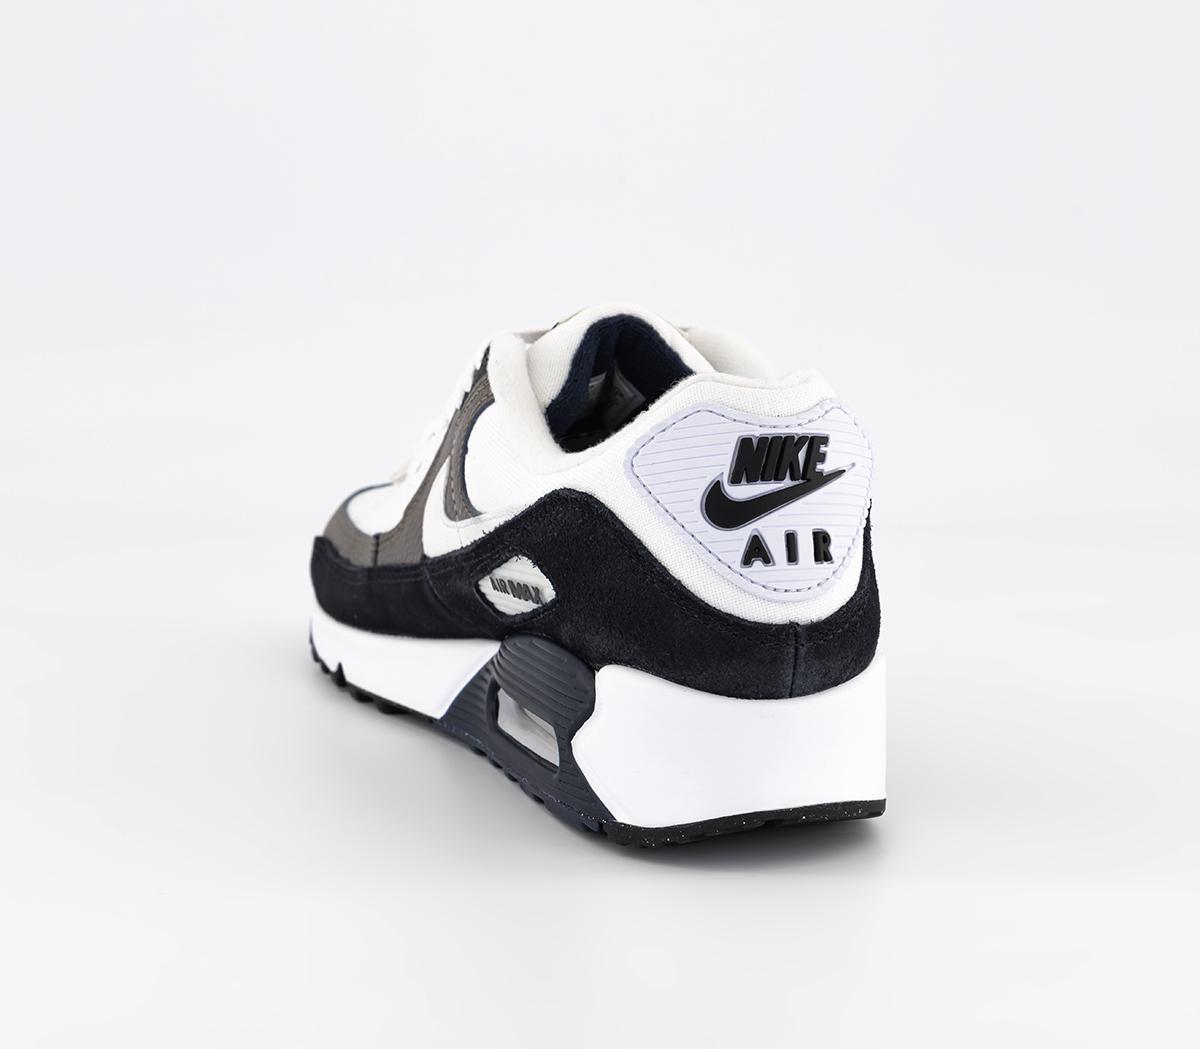 Nike Air Max 90 Trainers Flat Pewter White Black Obsidian - Men's Trainers